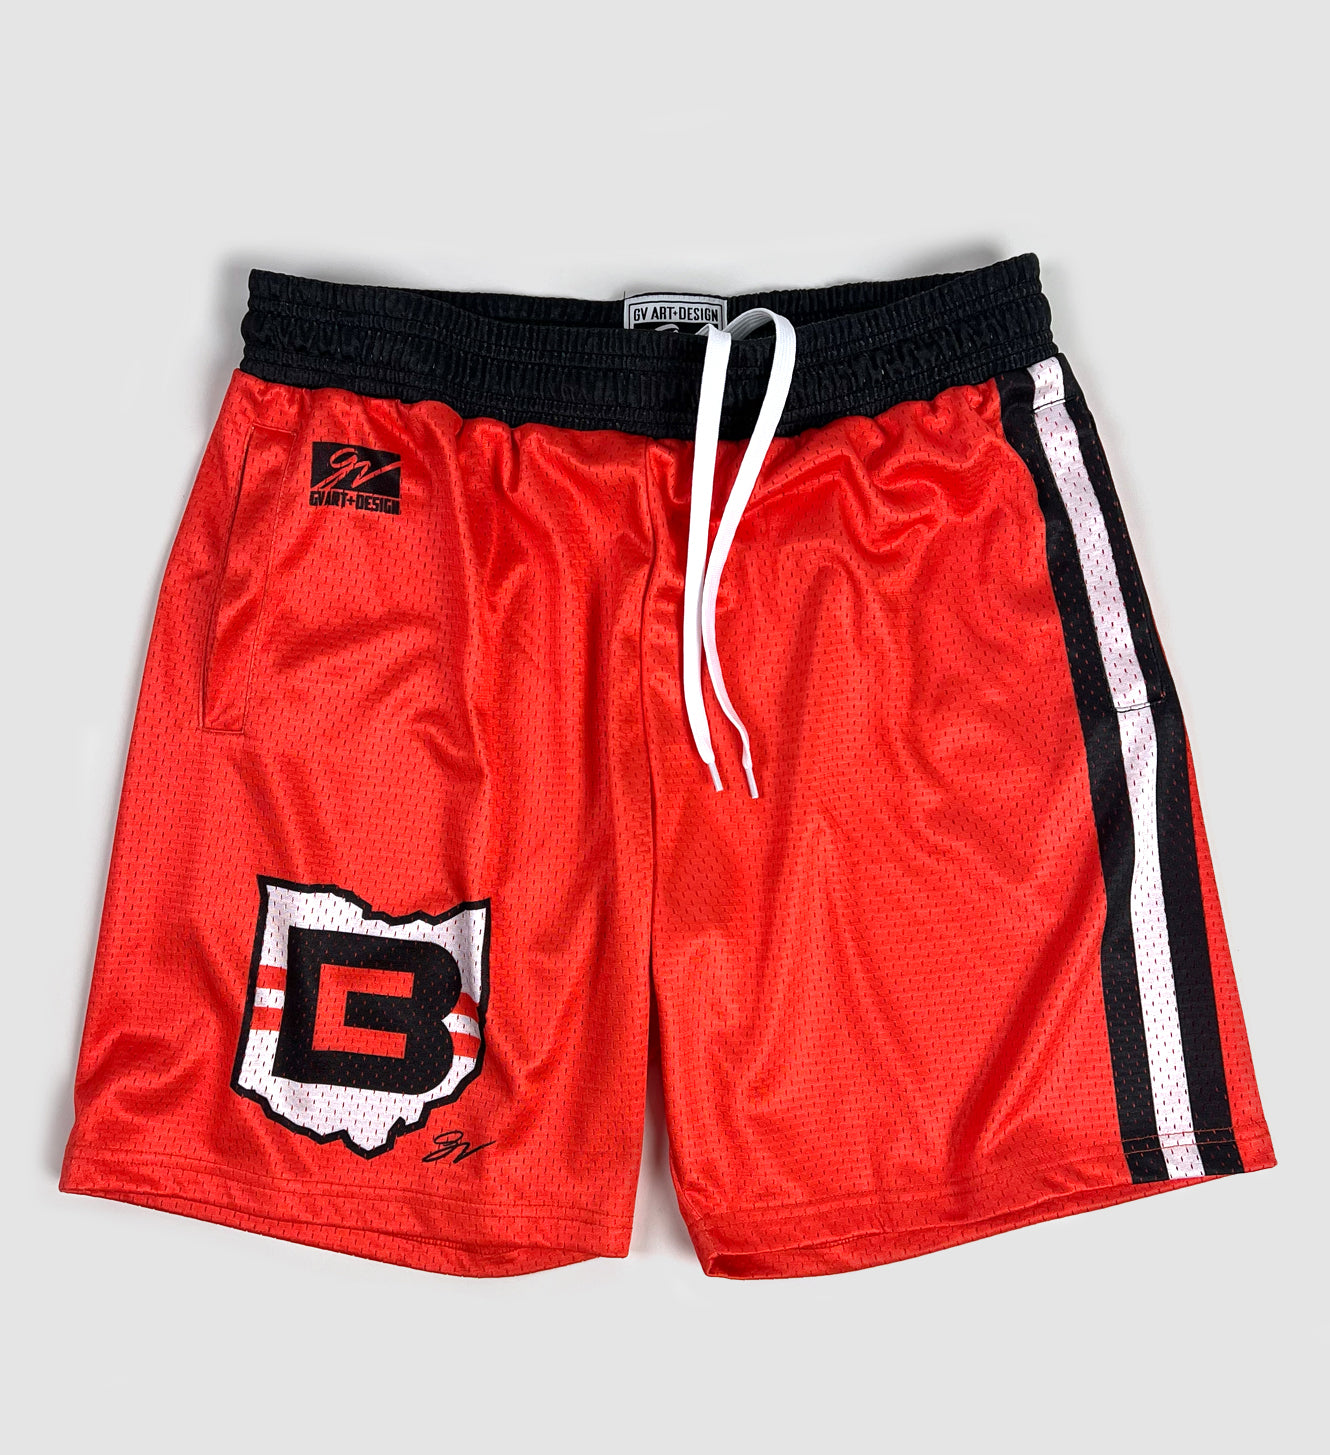 Shorts, Graphic - Short De Sport Pitch Gray, Red